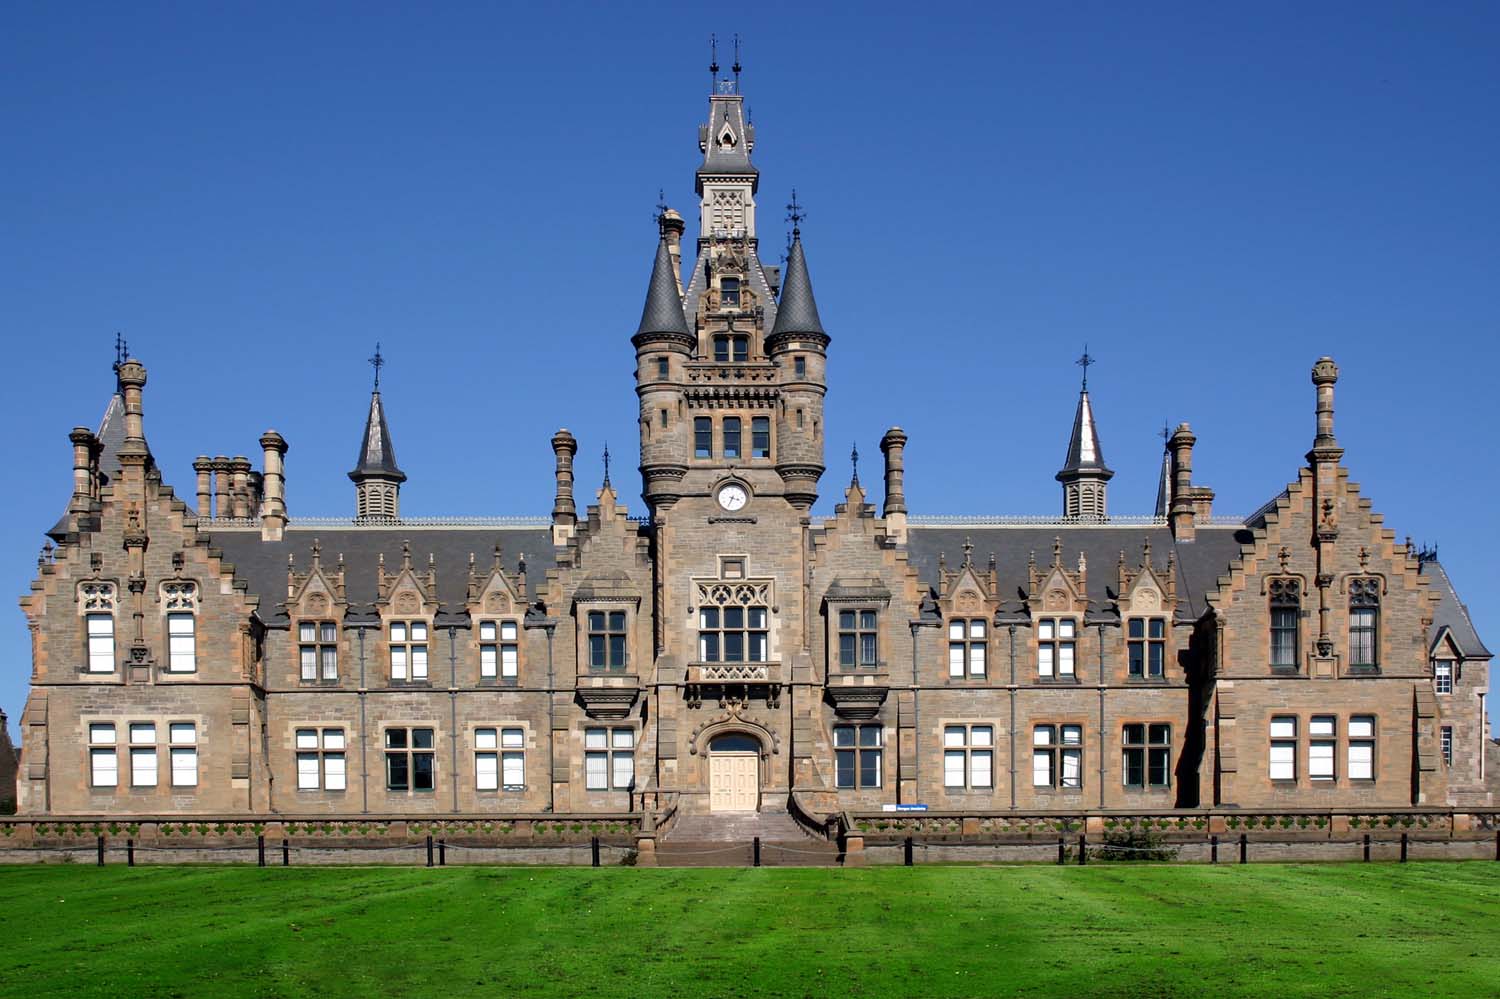 The exterior view of a large victorian school building built from site and with a large clock tower at the centre of the image